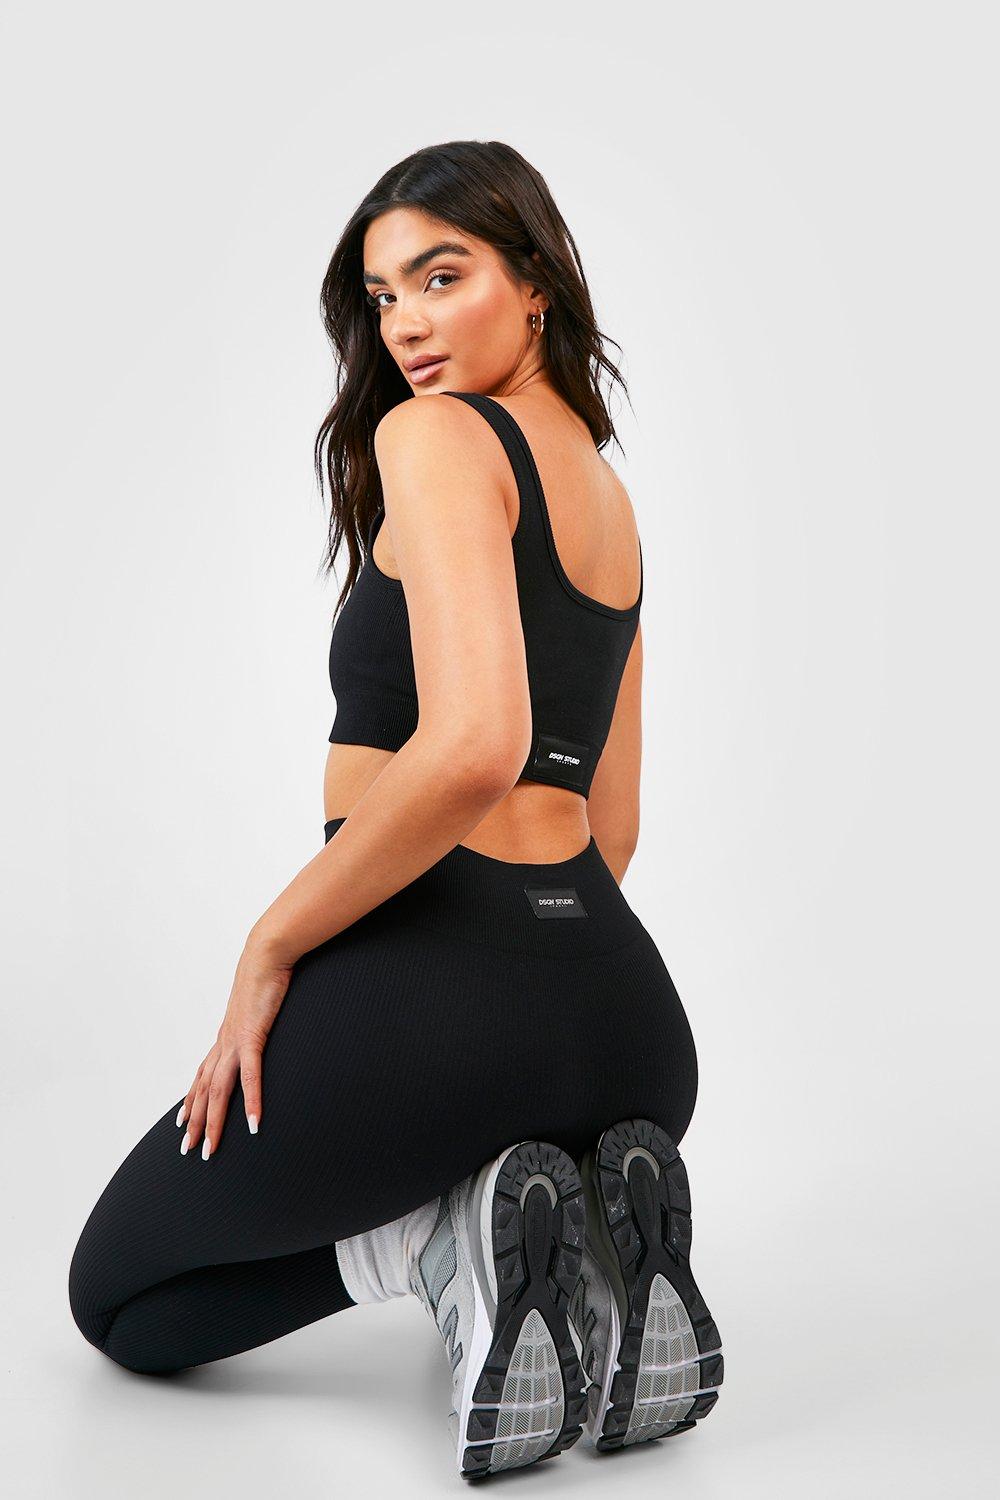 ASOS 4505 seamless legging with bum ruche and contour - part of a